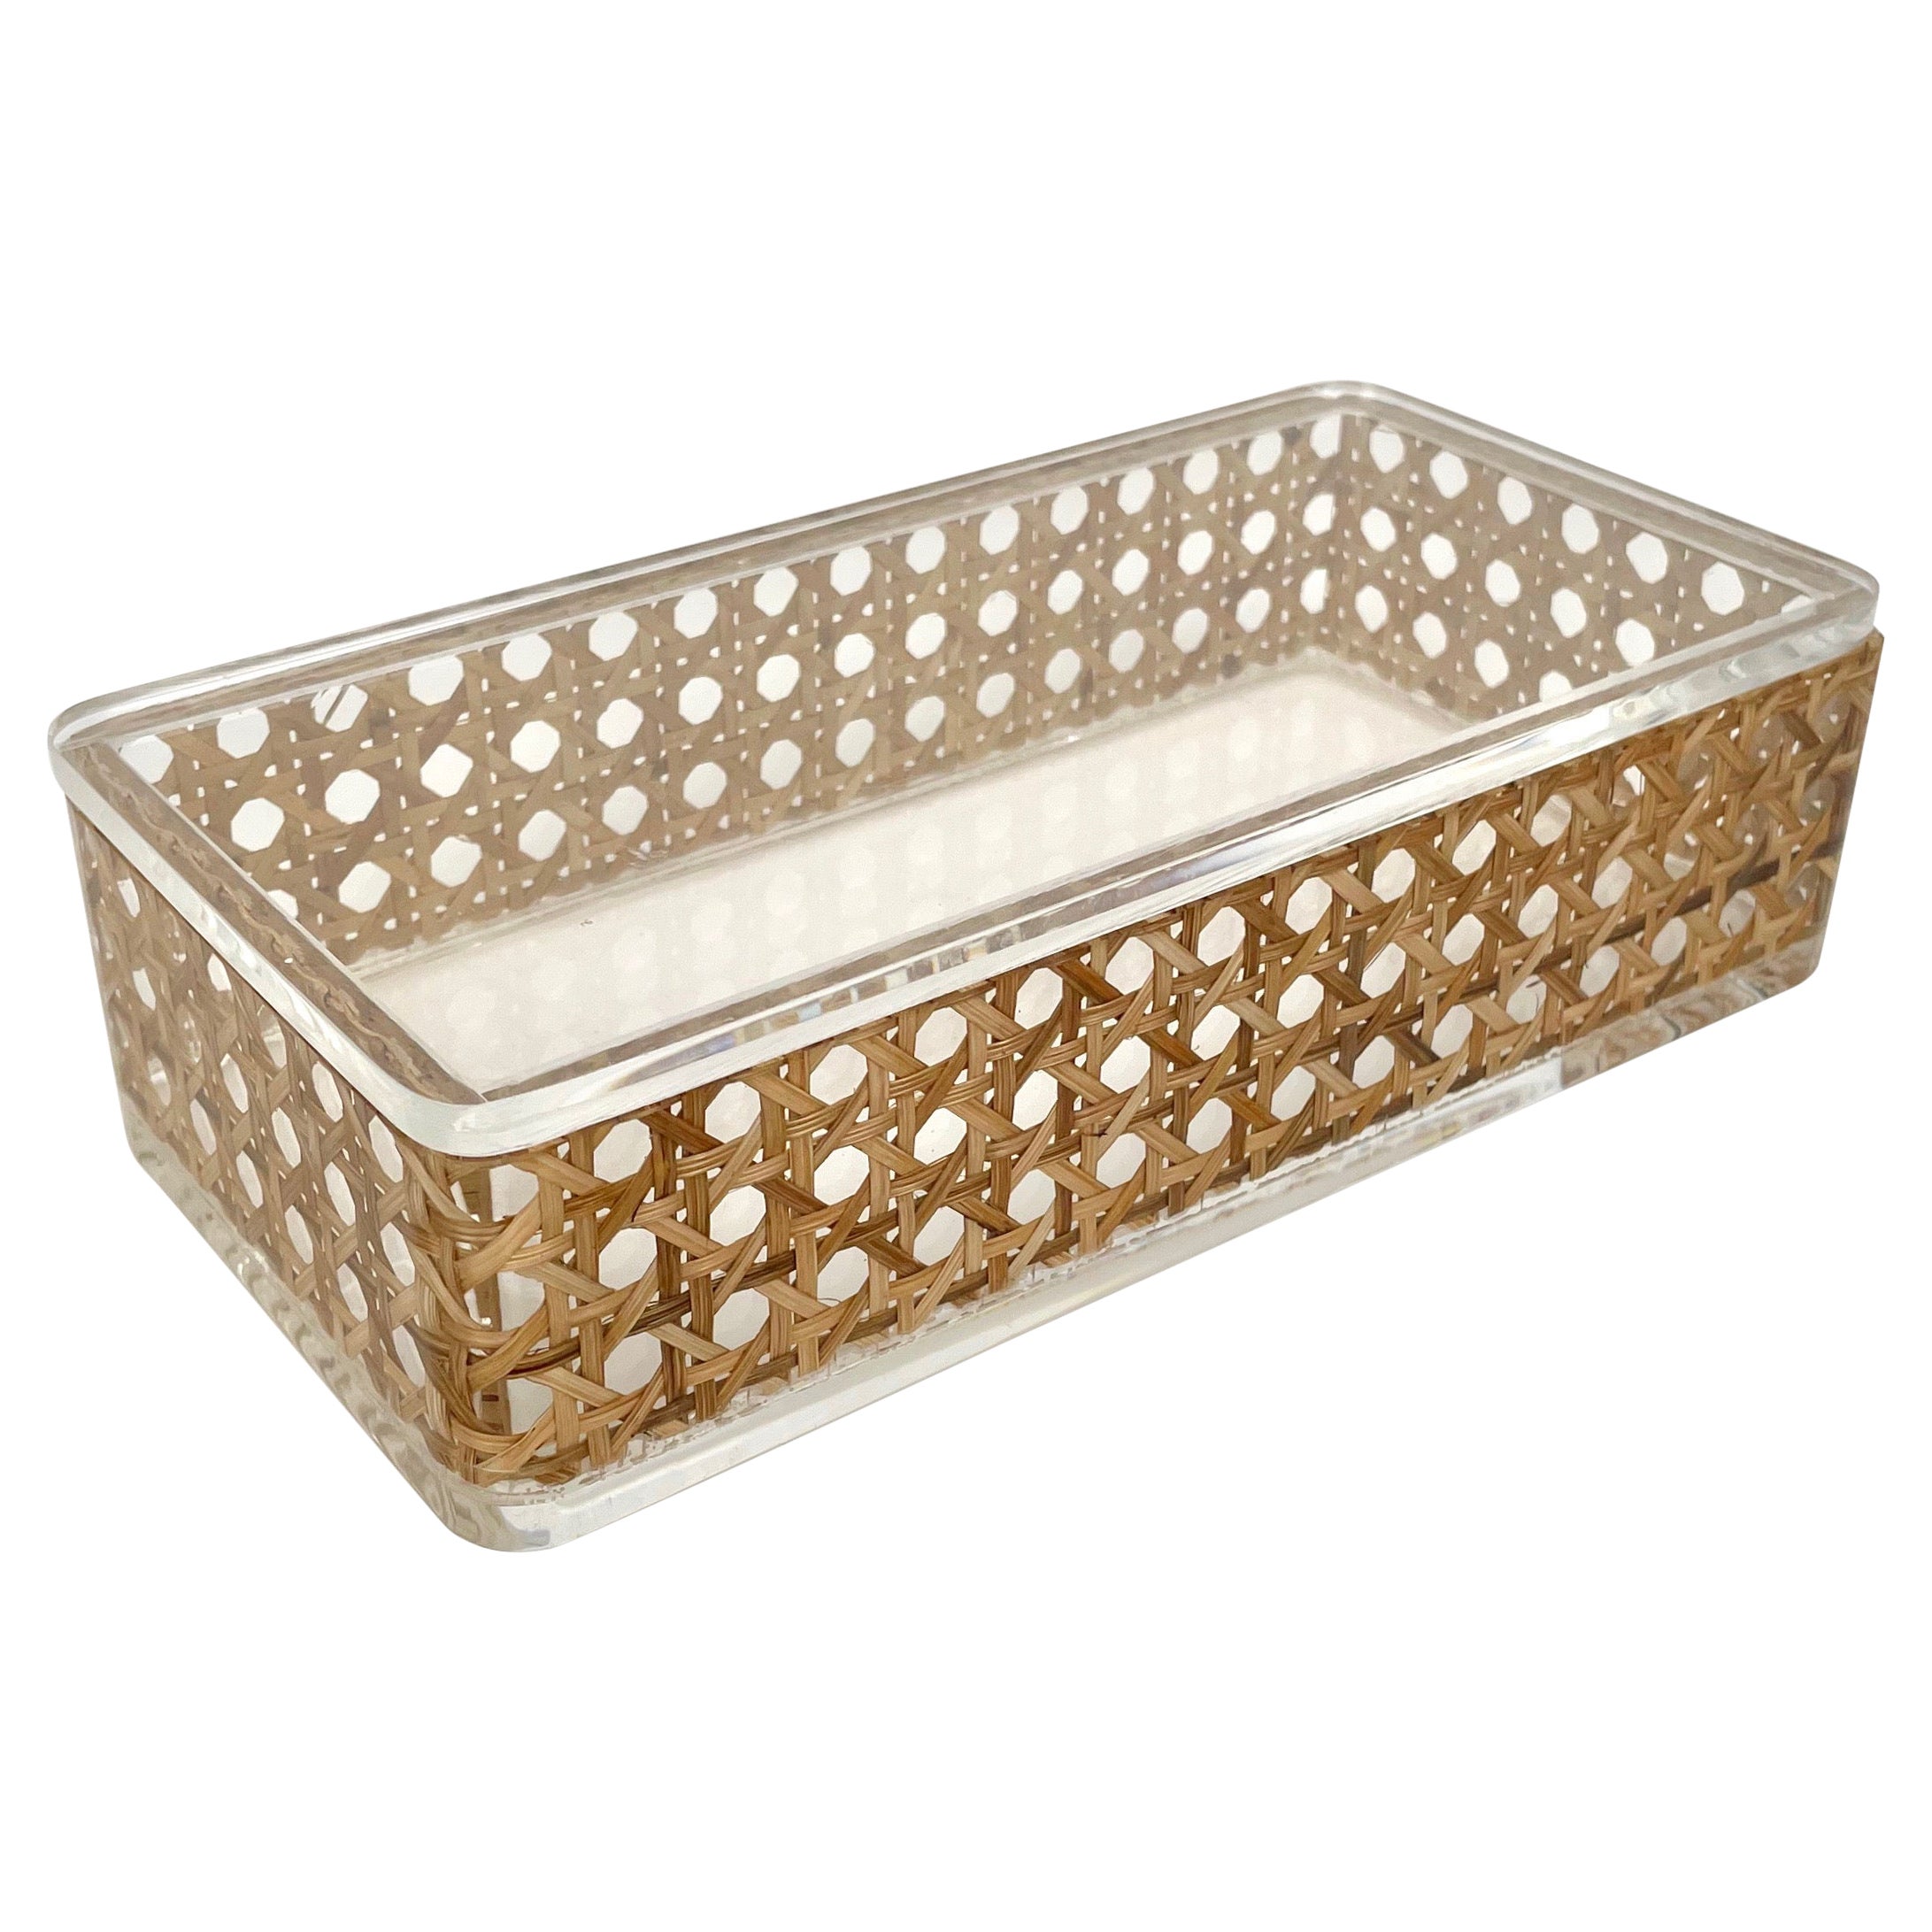 Rectangular Box Lucite and Rattan Christian Dior Home Style, Italy, 1970s